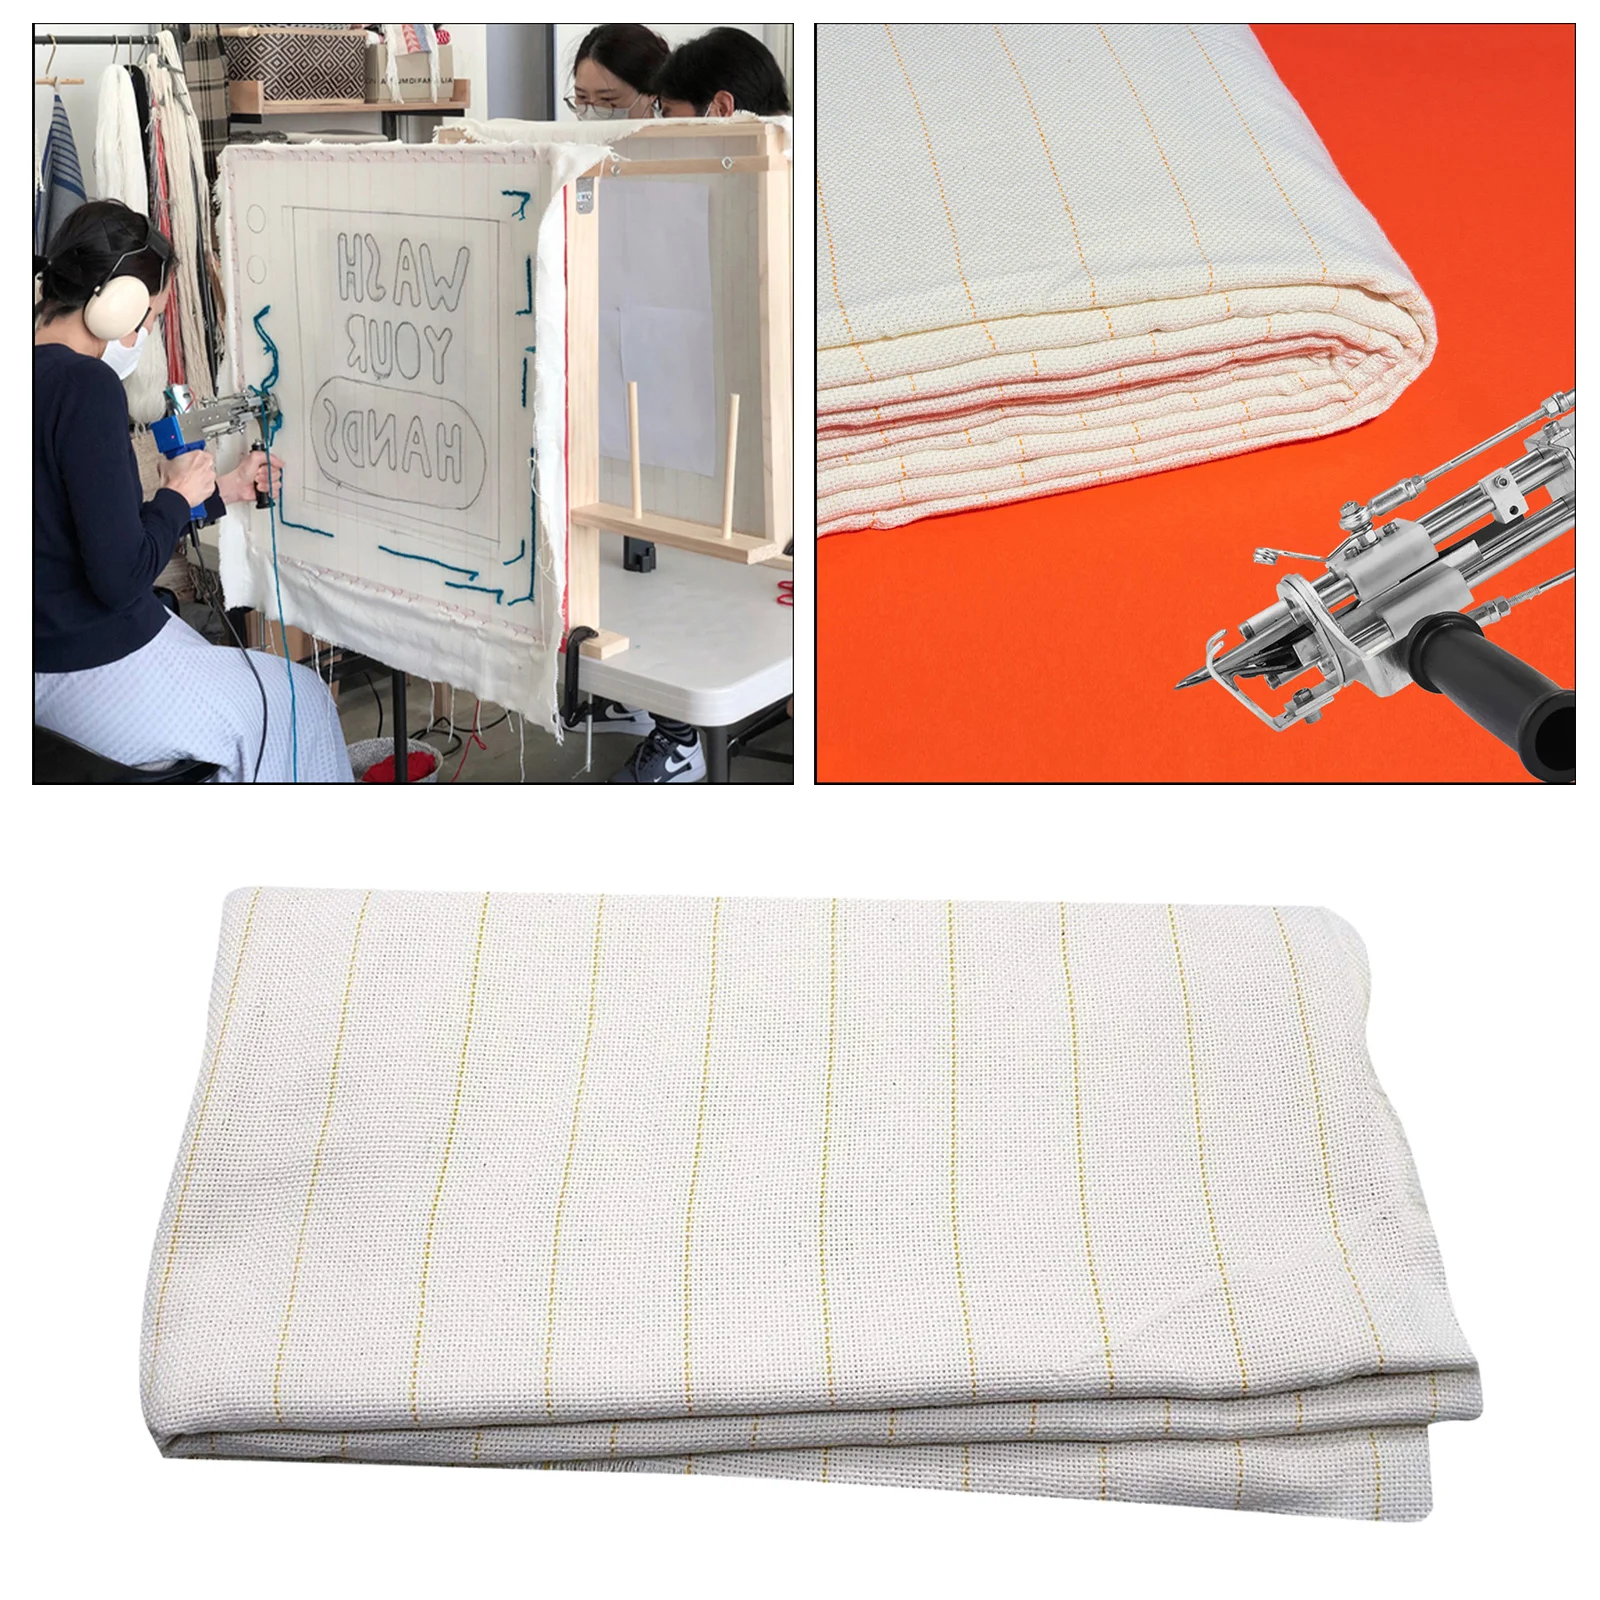 2.1x1meter Monk Cloth Tufting Cloth with Marked Lines for Tufting Gun DIY Aida Cloth Cross Stitch Fabric Embroidery Cloth